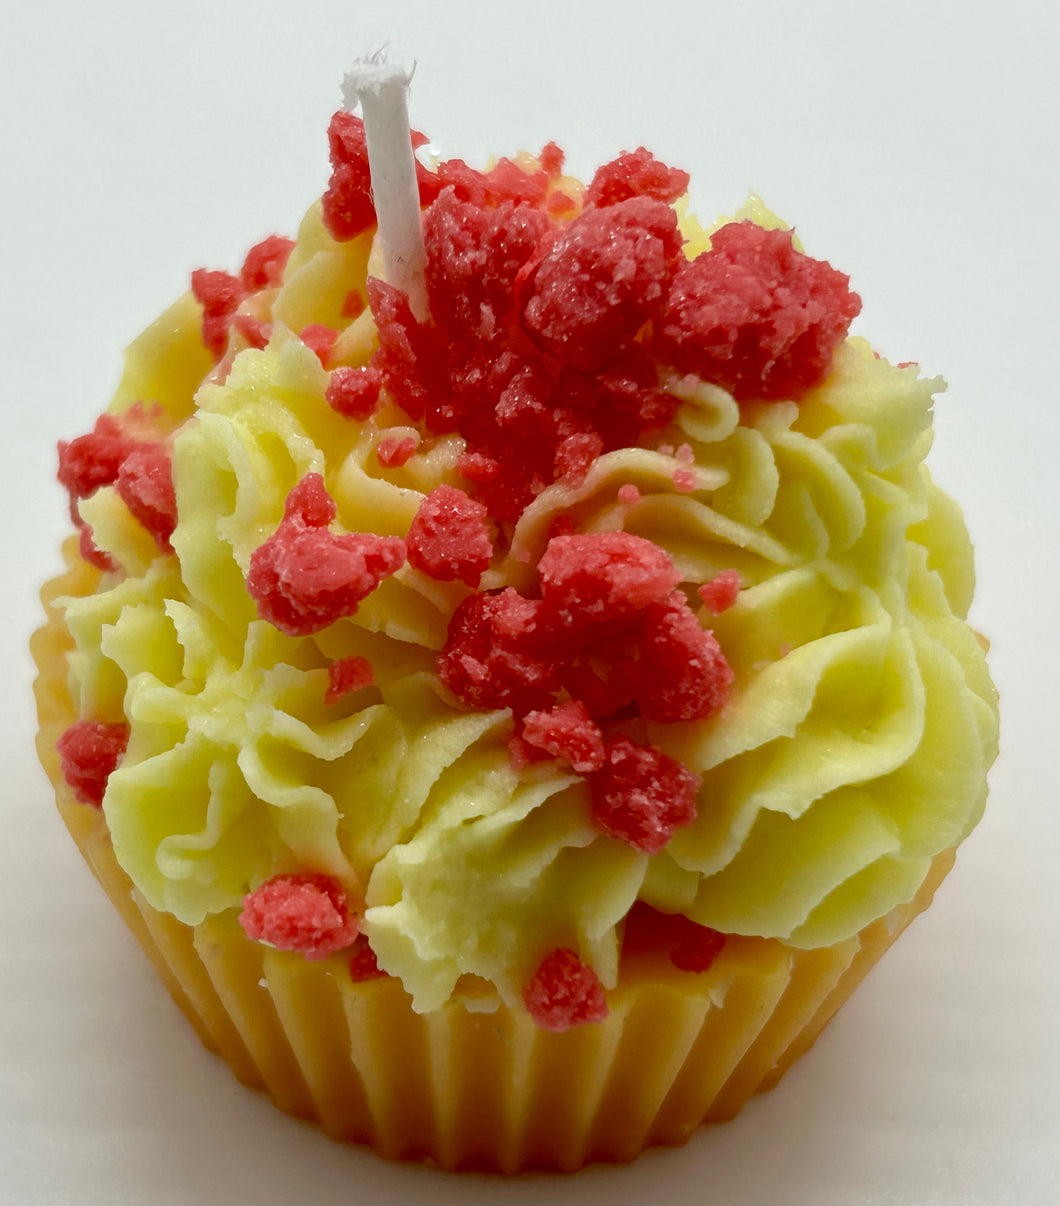 Cupcake Wax Melt with Crumbles